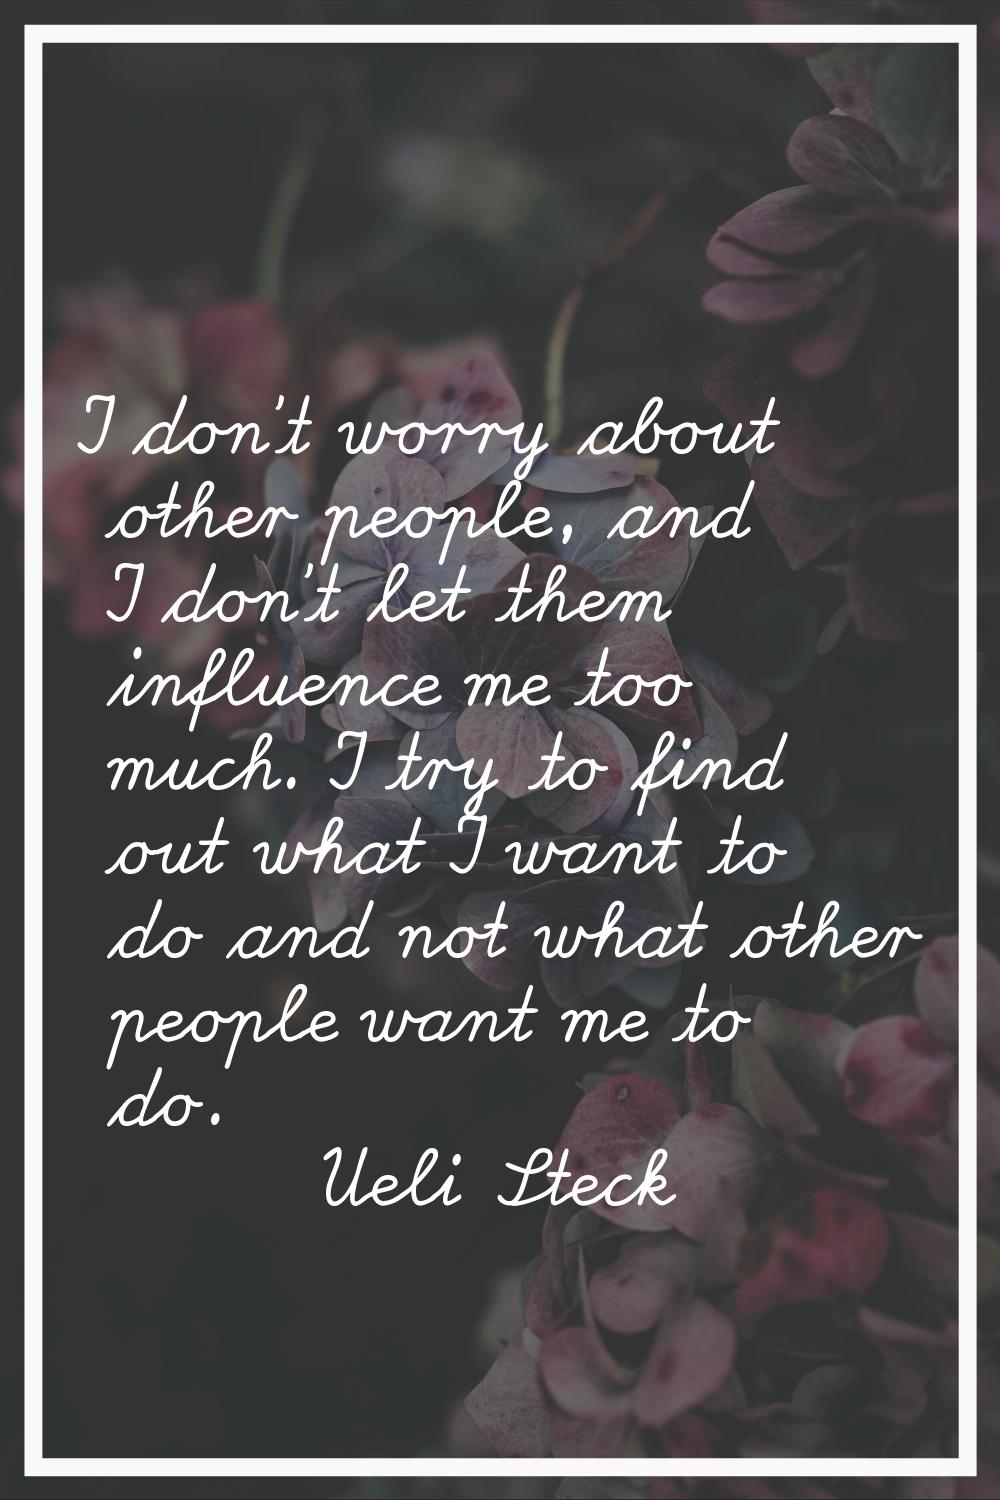 I don't worry about other people, and I don't let them influence me too much. I try to find out wha